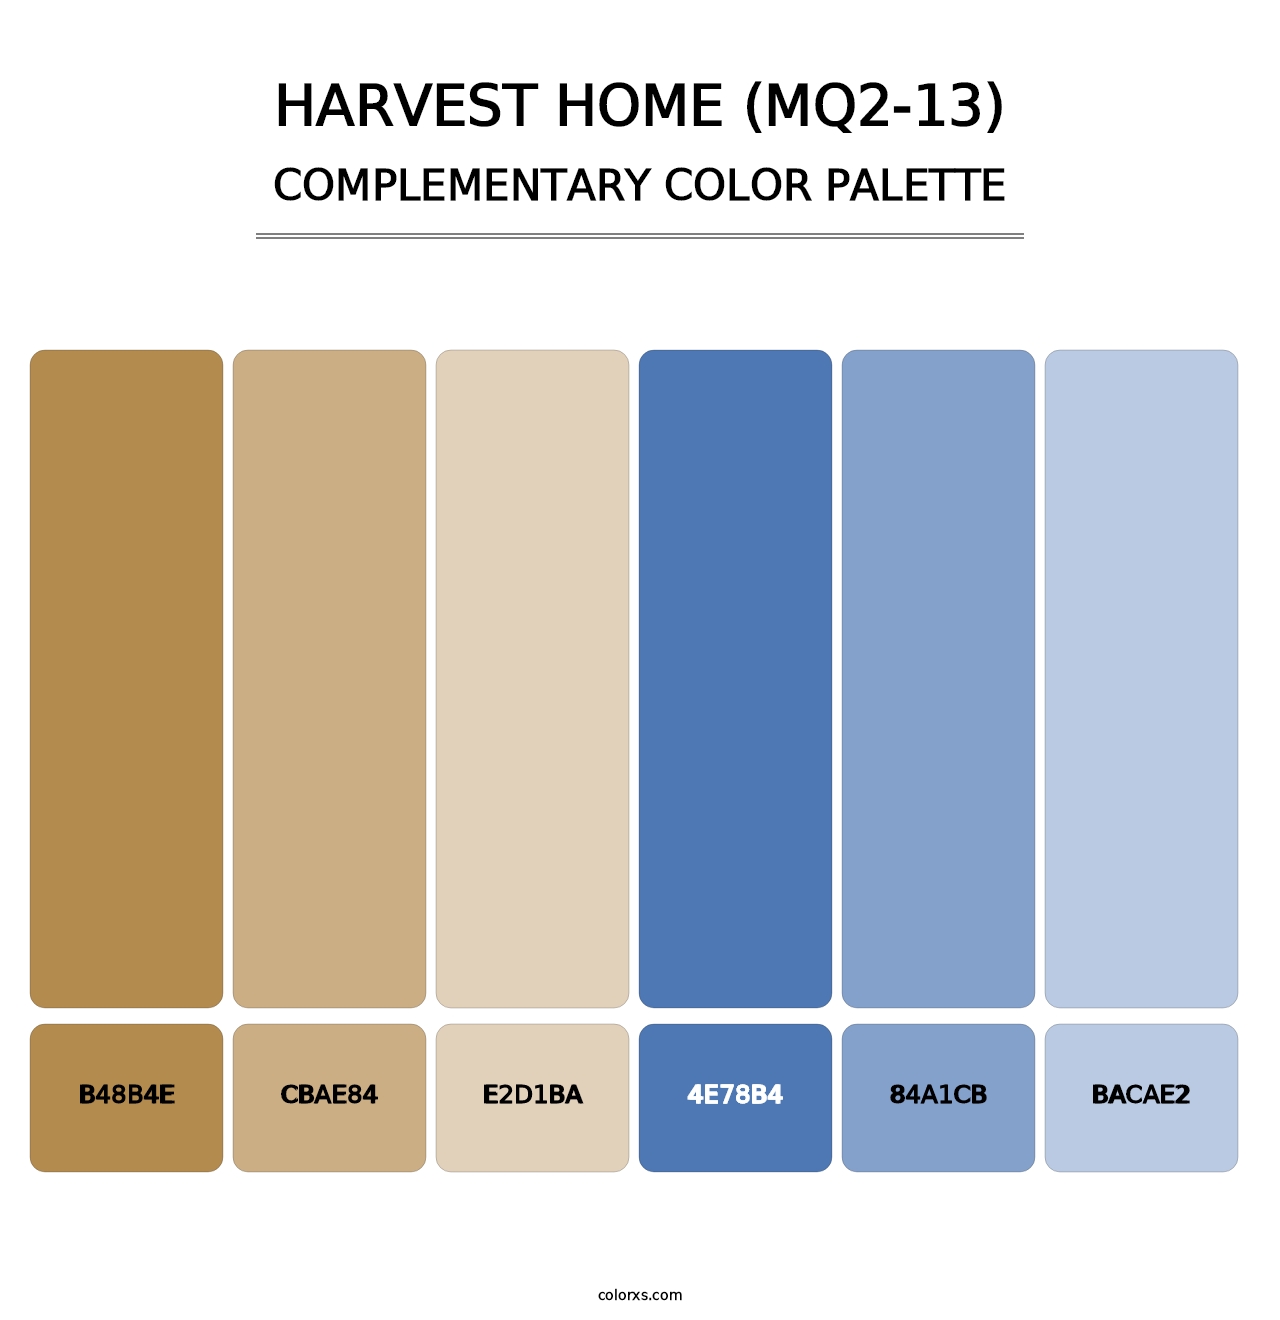 Harvest Home (MQ2-13) - Complementary Color Palette